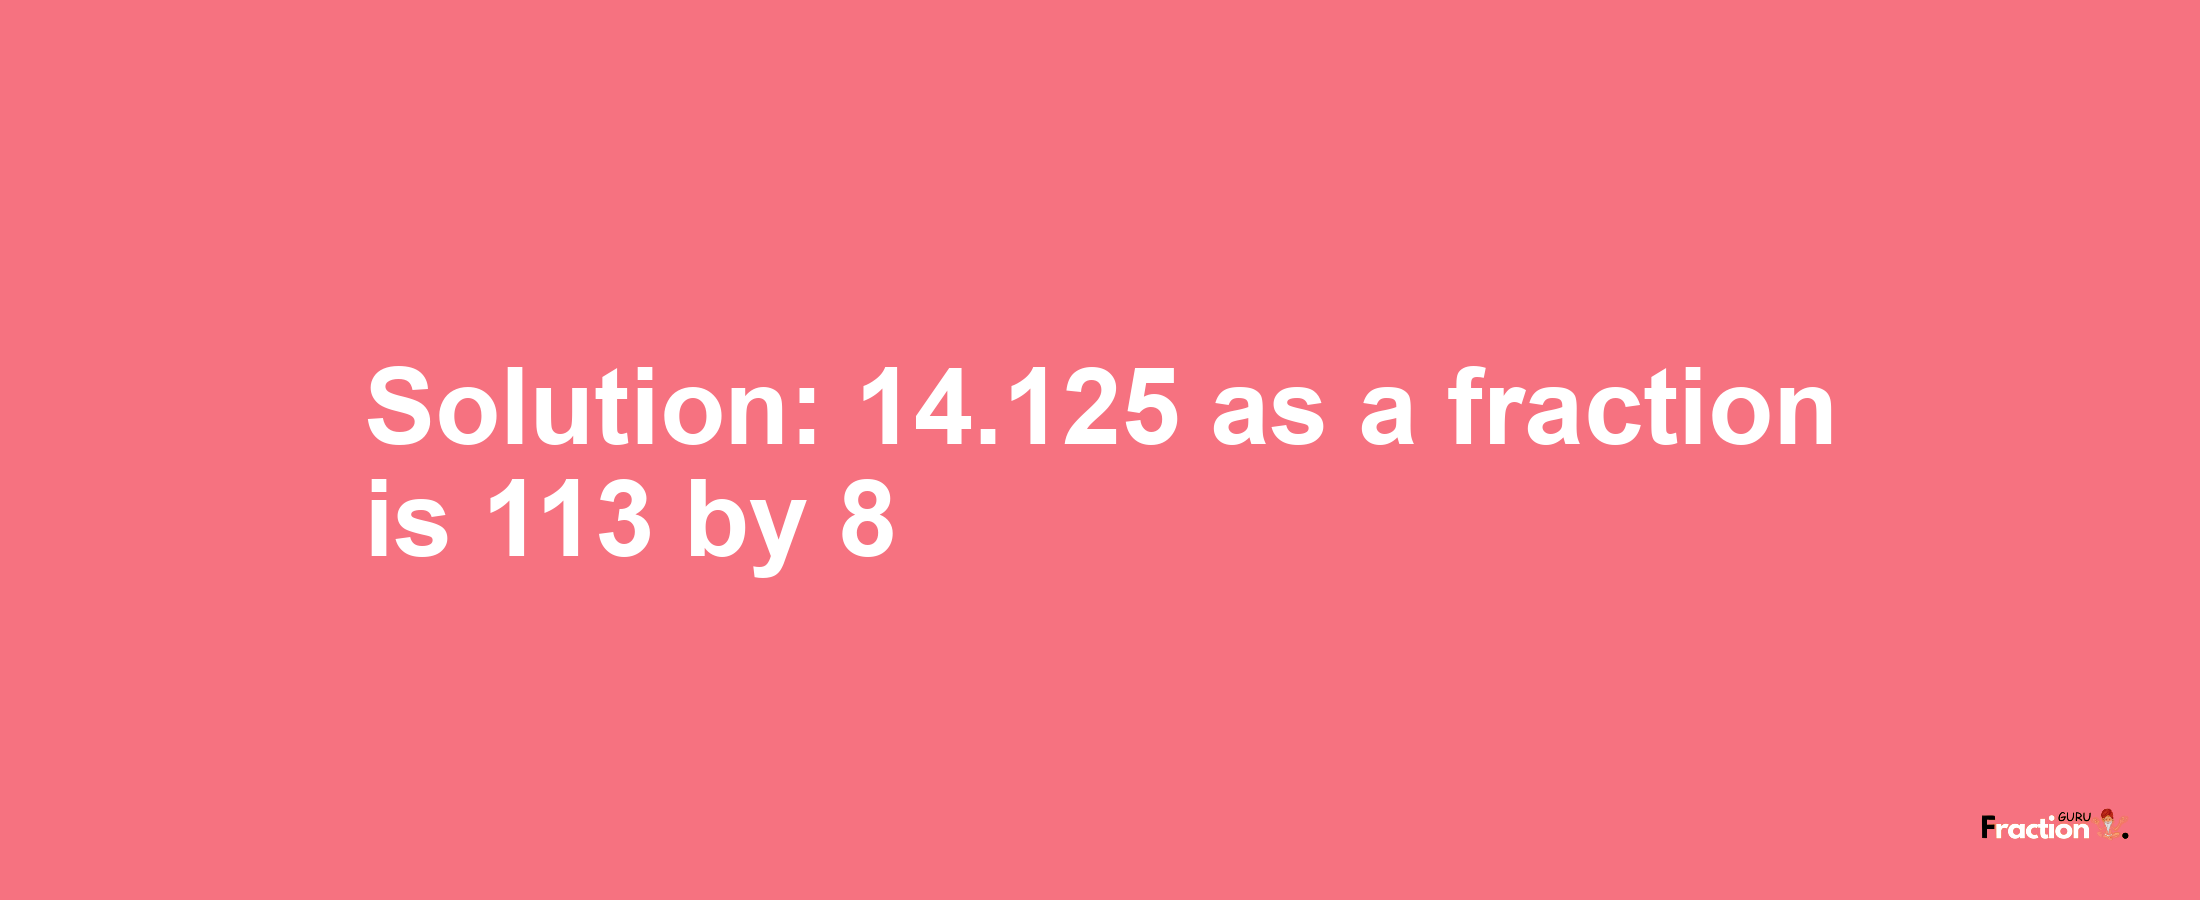 Solution:14.125 as a fraction is 113/8